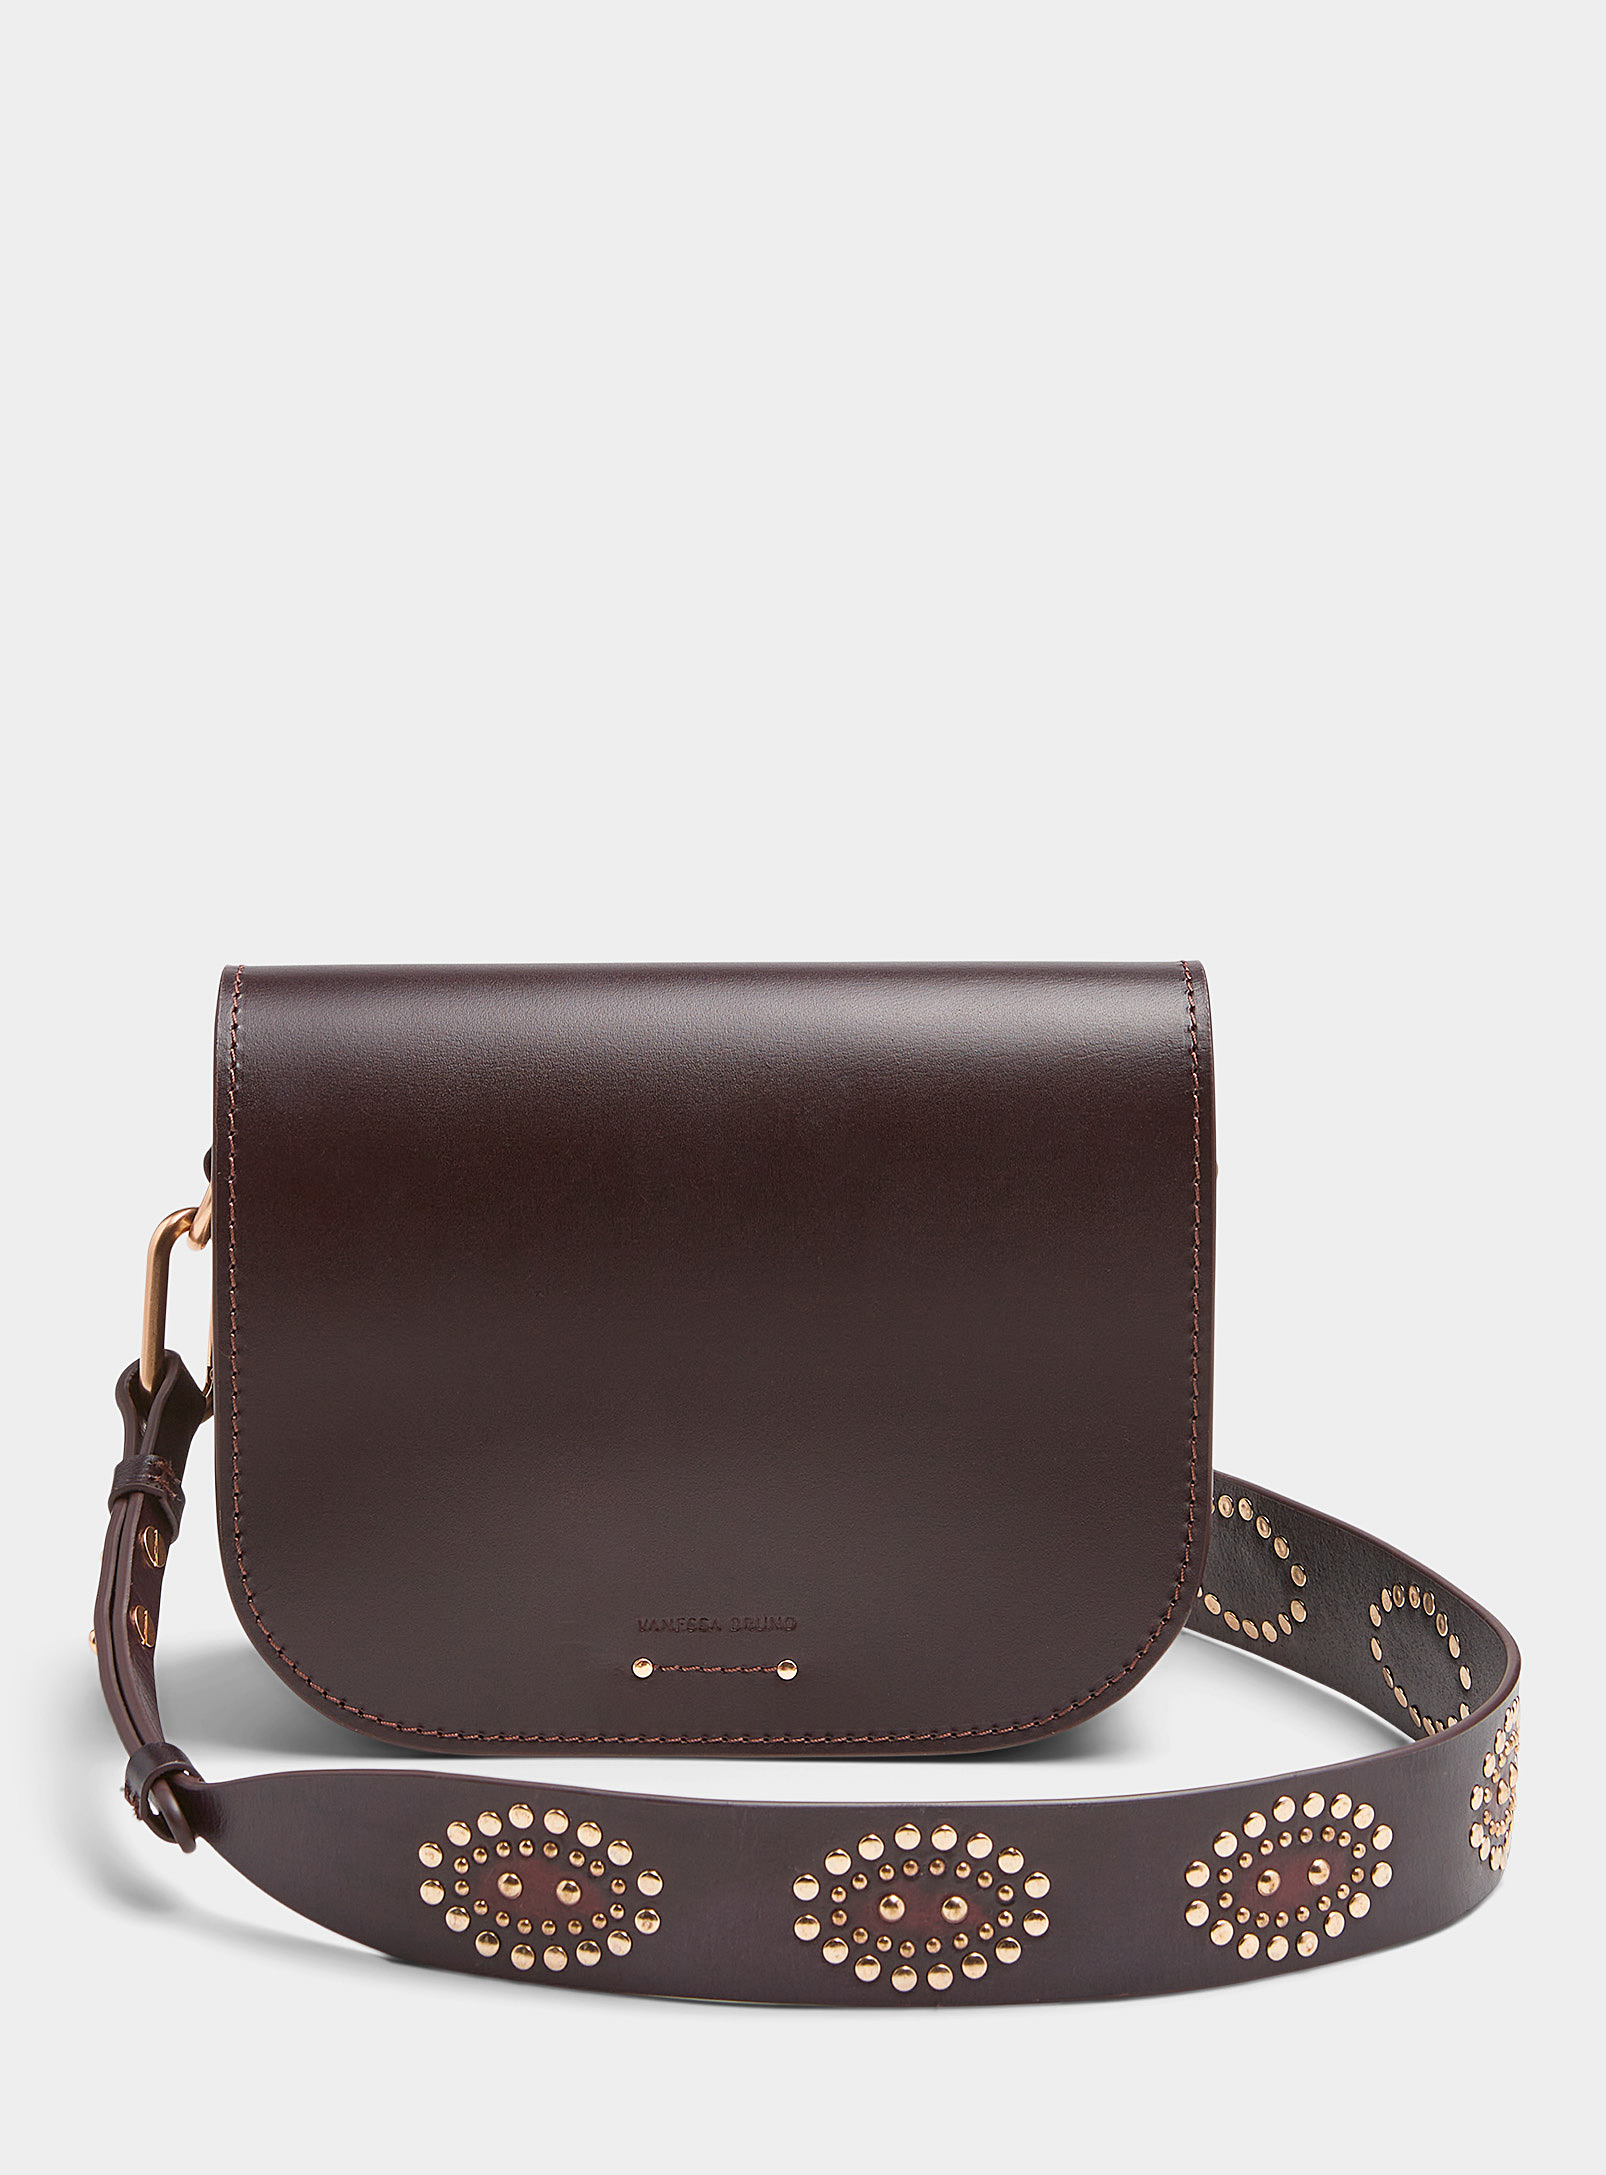 Vanessa Bruno - Women's Holly smooth leather studded flap bag